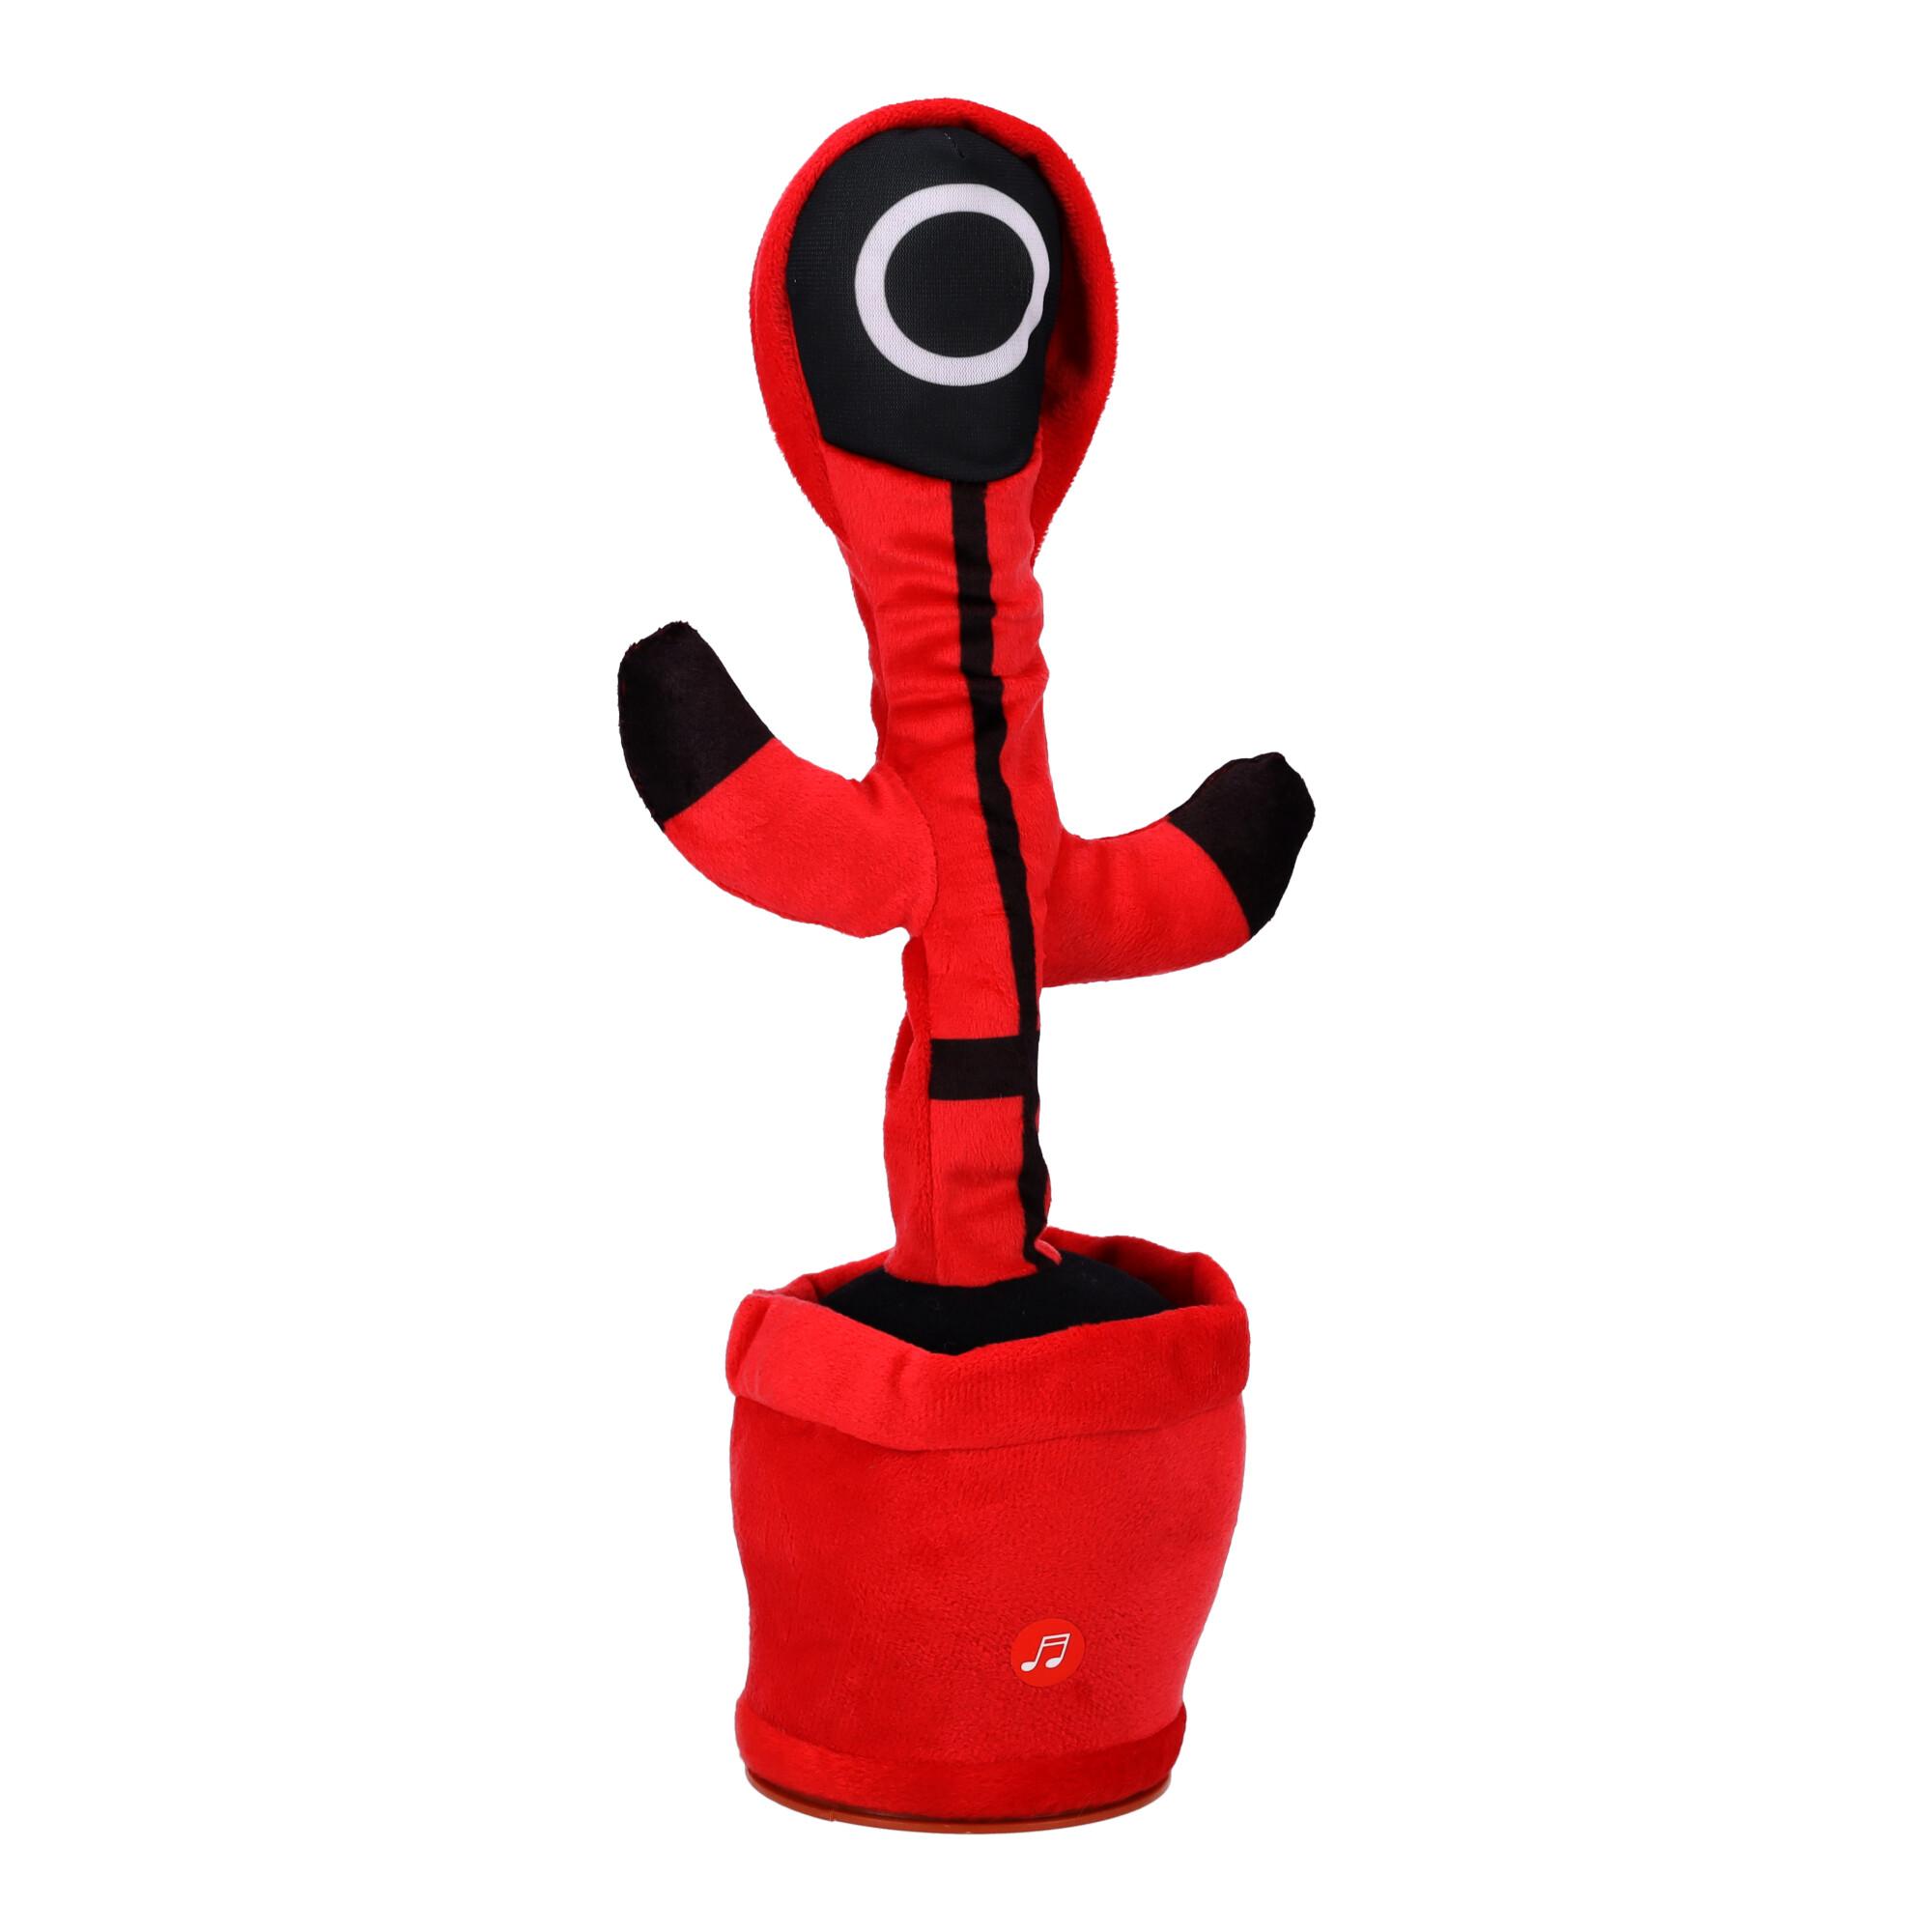 Children's toy - Dancing and singing cactus SQUID GAME - red circle